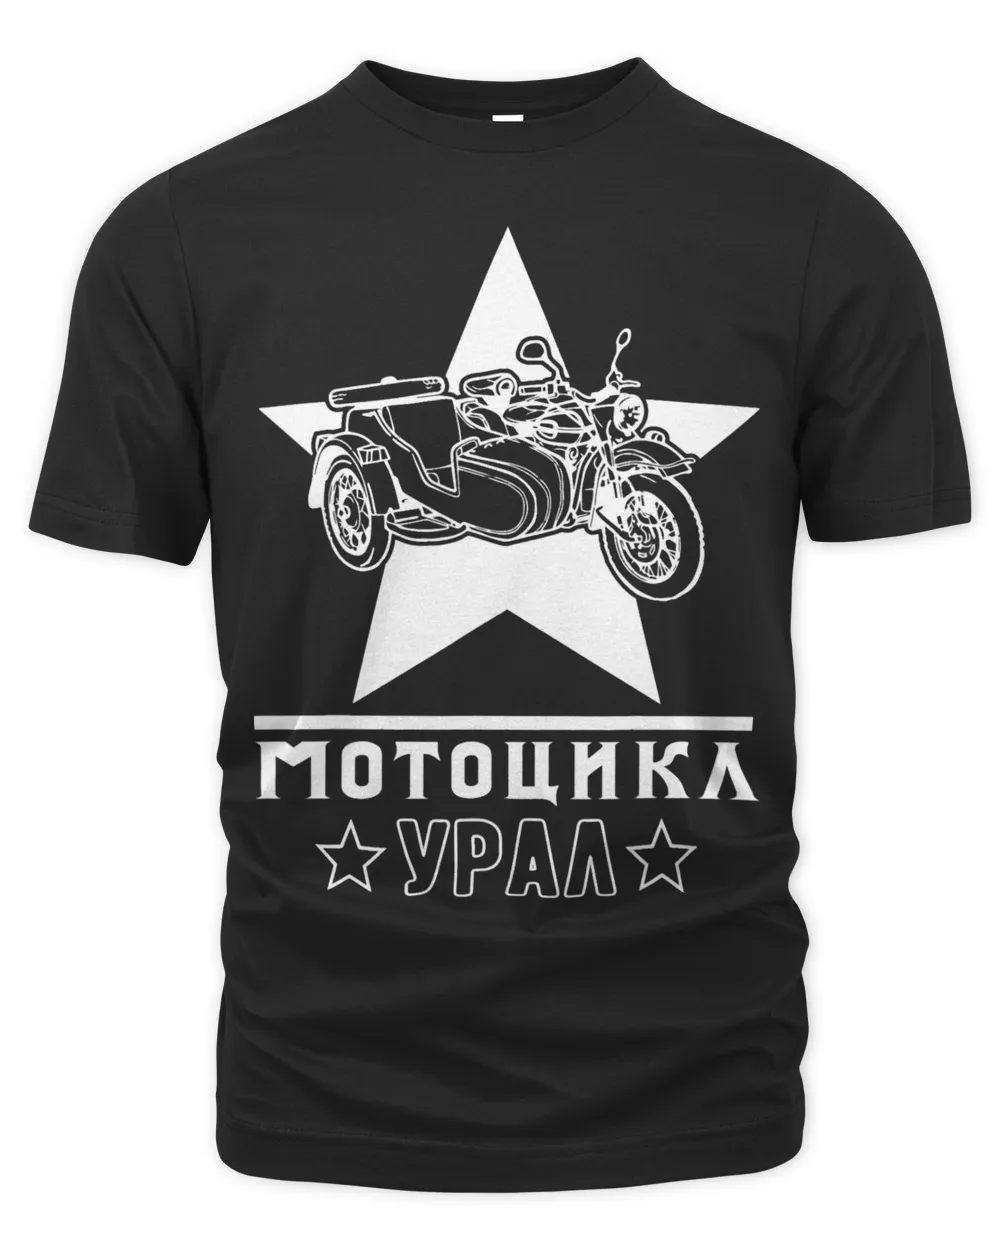 Ural motorcycle offroad motorcyclist 68